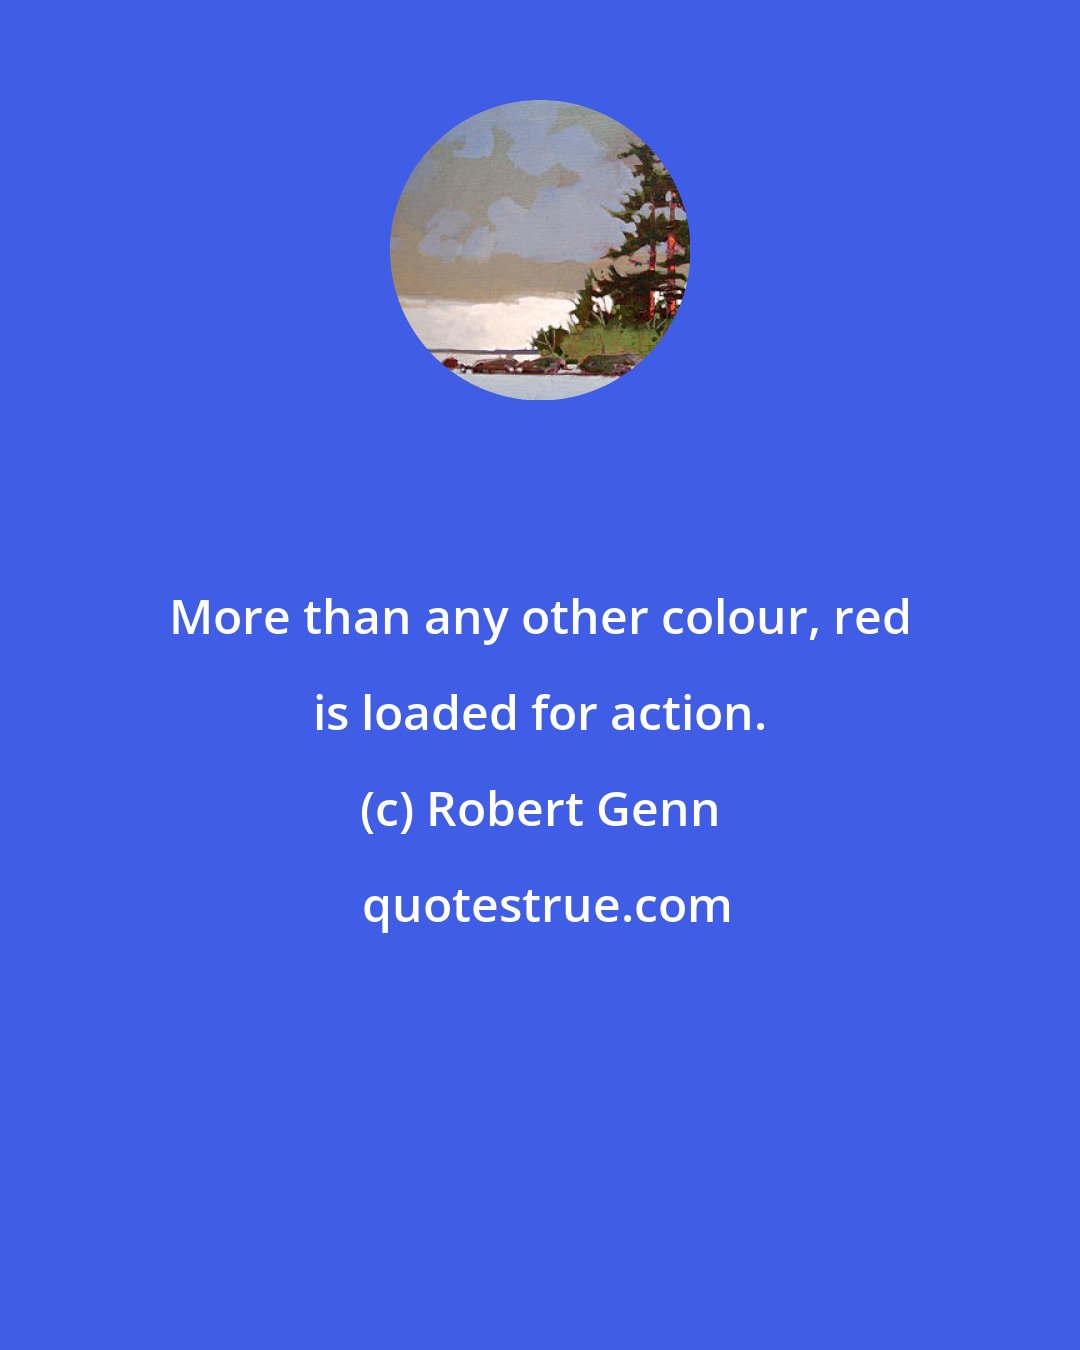 Robert Genn: More than any other colour, red is loaded for action.